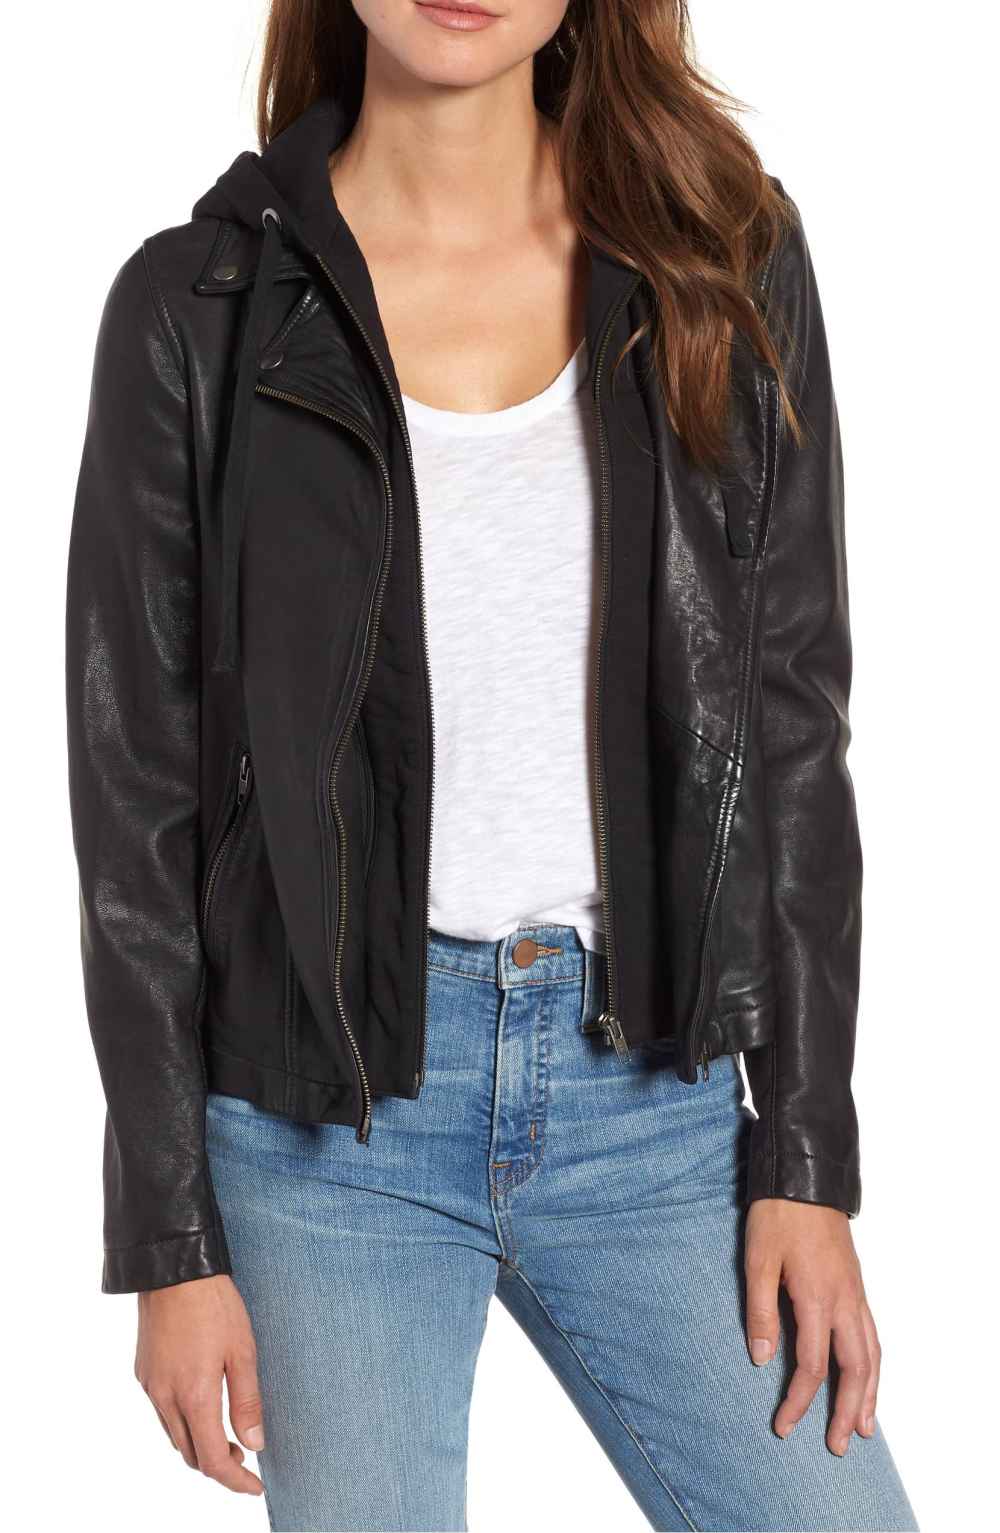 We Found the Perfect Leather Jacket for Holiday Dressing | Us Weekly